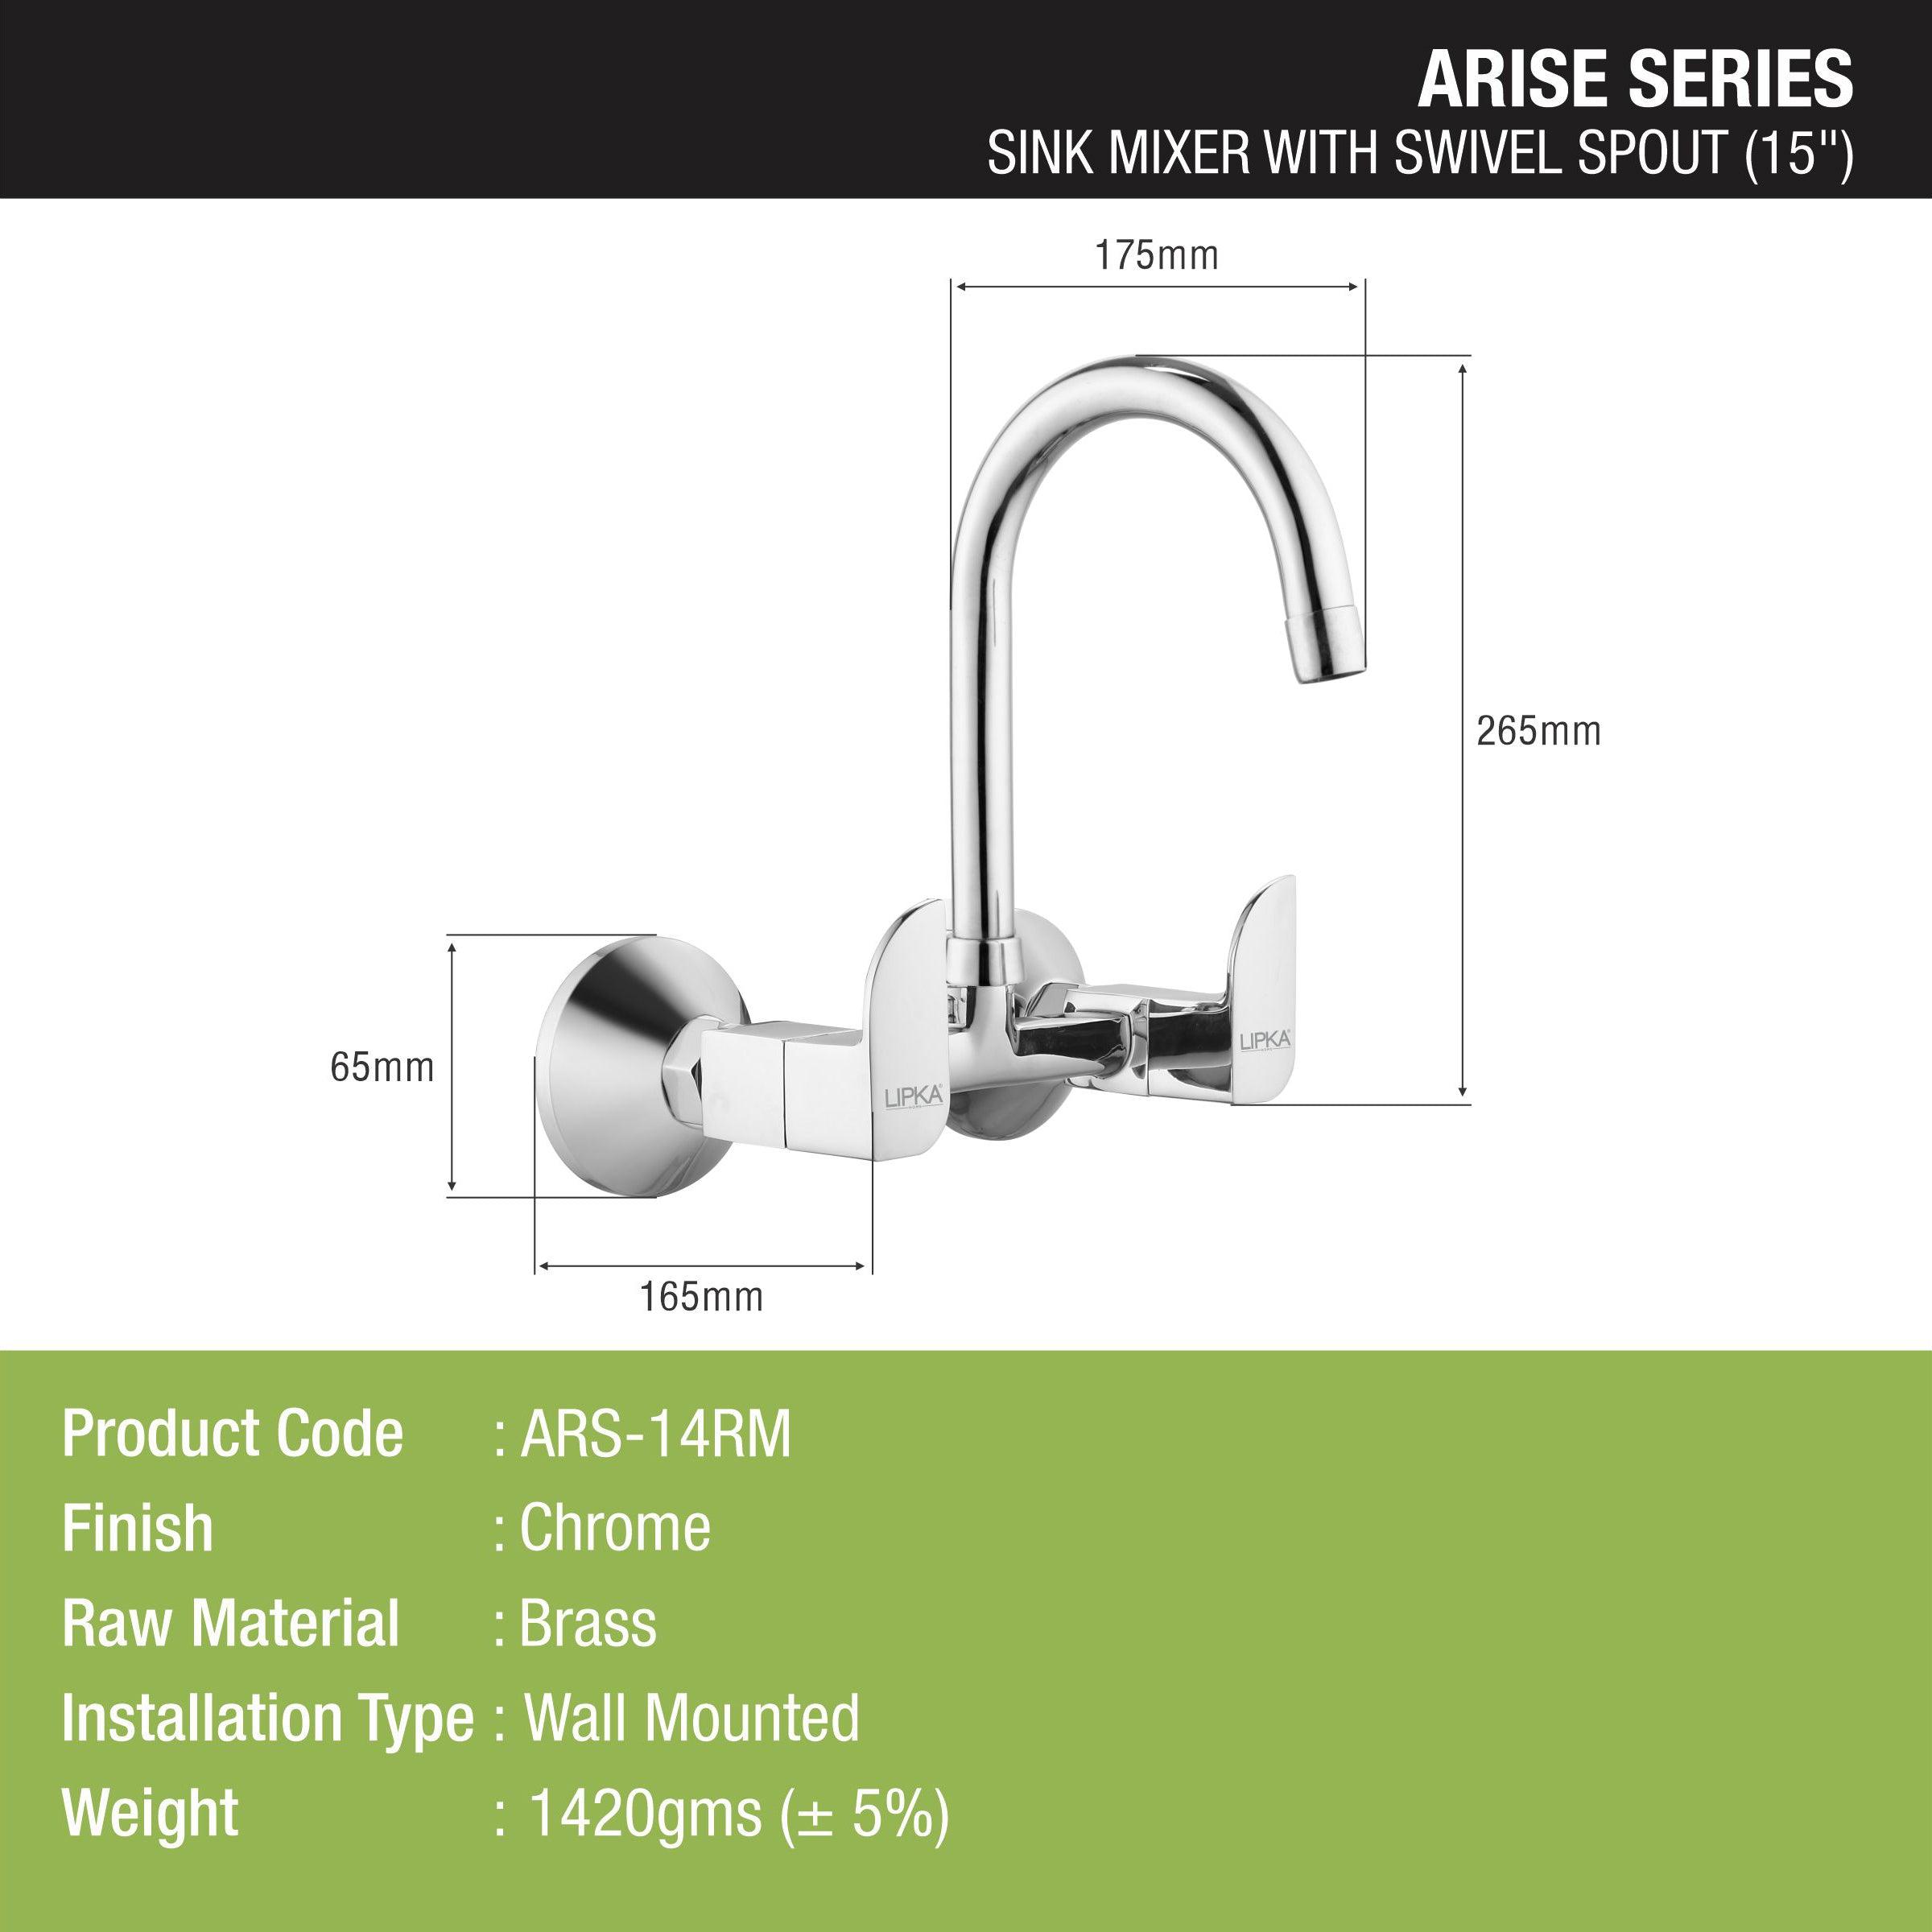 Arise Sink Mixer Brass Faucet with Round Swivel Spout (15 Inches) - LIPKA - Lipka Home